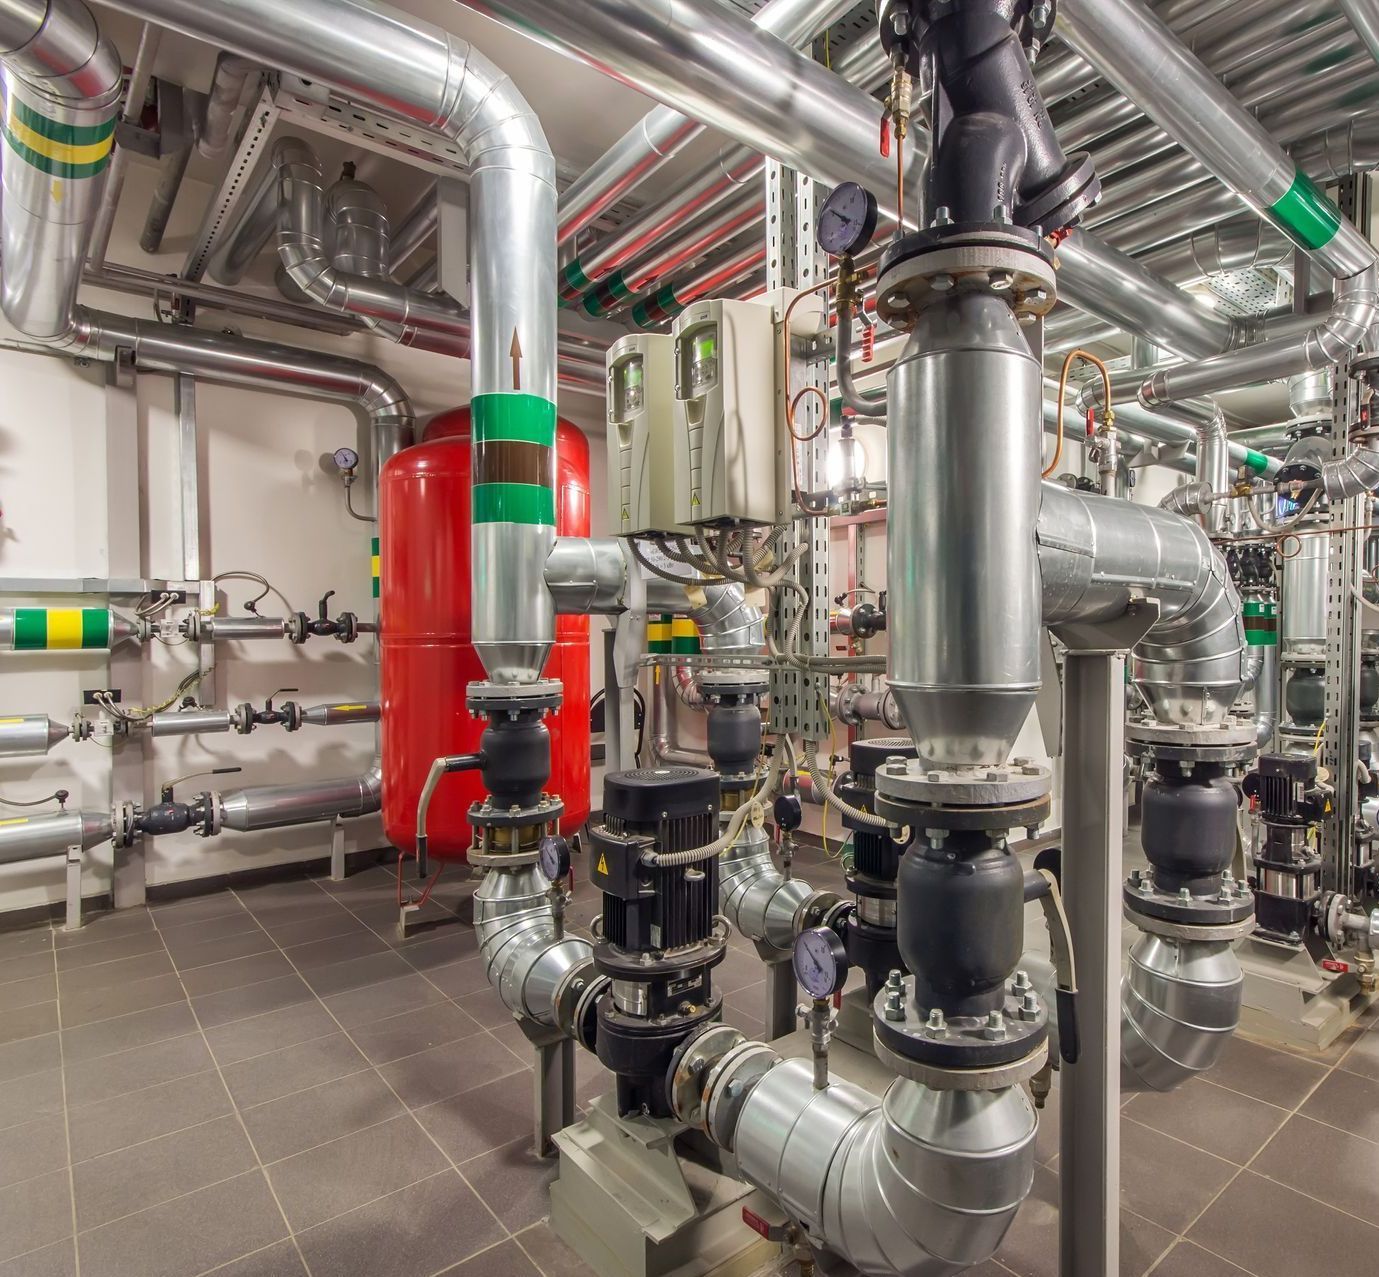 a room filled with lots of pipes and valves - a pump room of a large commercial building